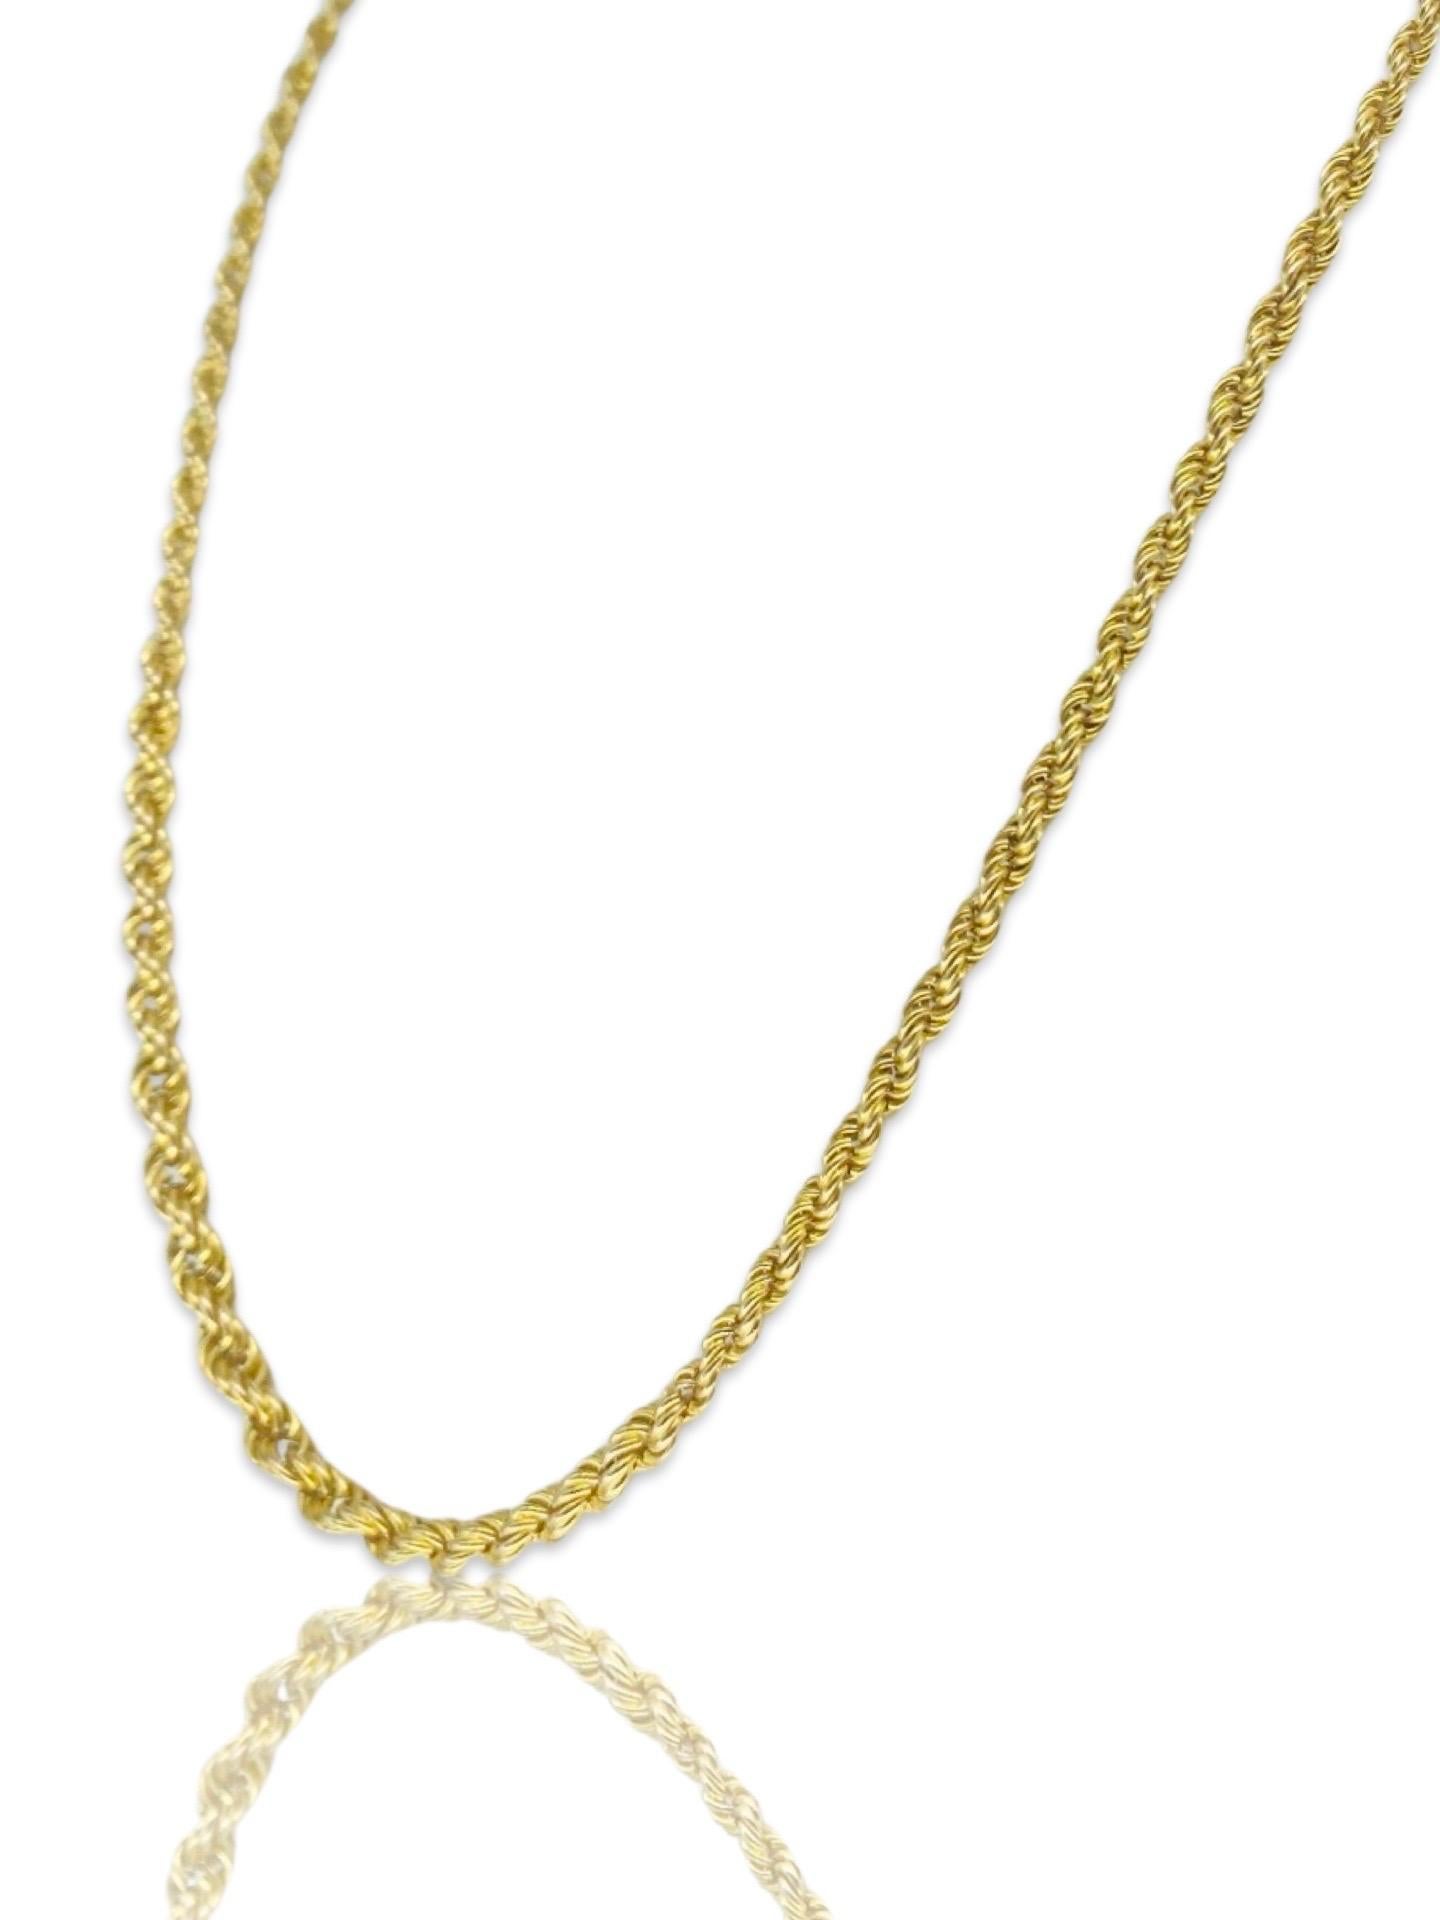 Vintage Graduating Rope Twist Necklace Ranging from 2.85mm - 5mm in width. The necklace measures 18 inches in length and features two gold spheres in the back as an enhancement. The total weight of the necklace is 17.4g